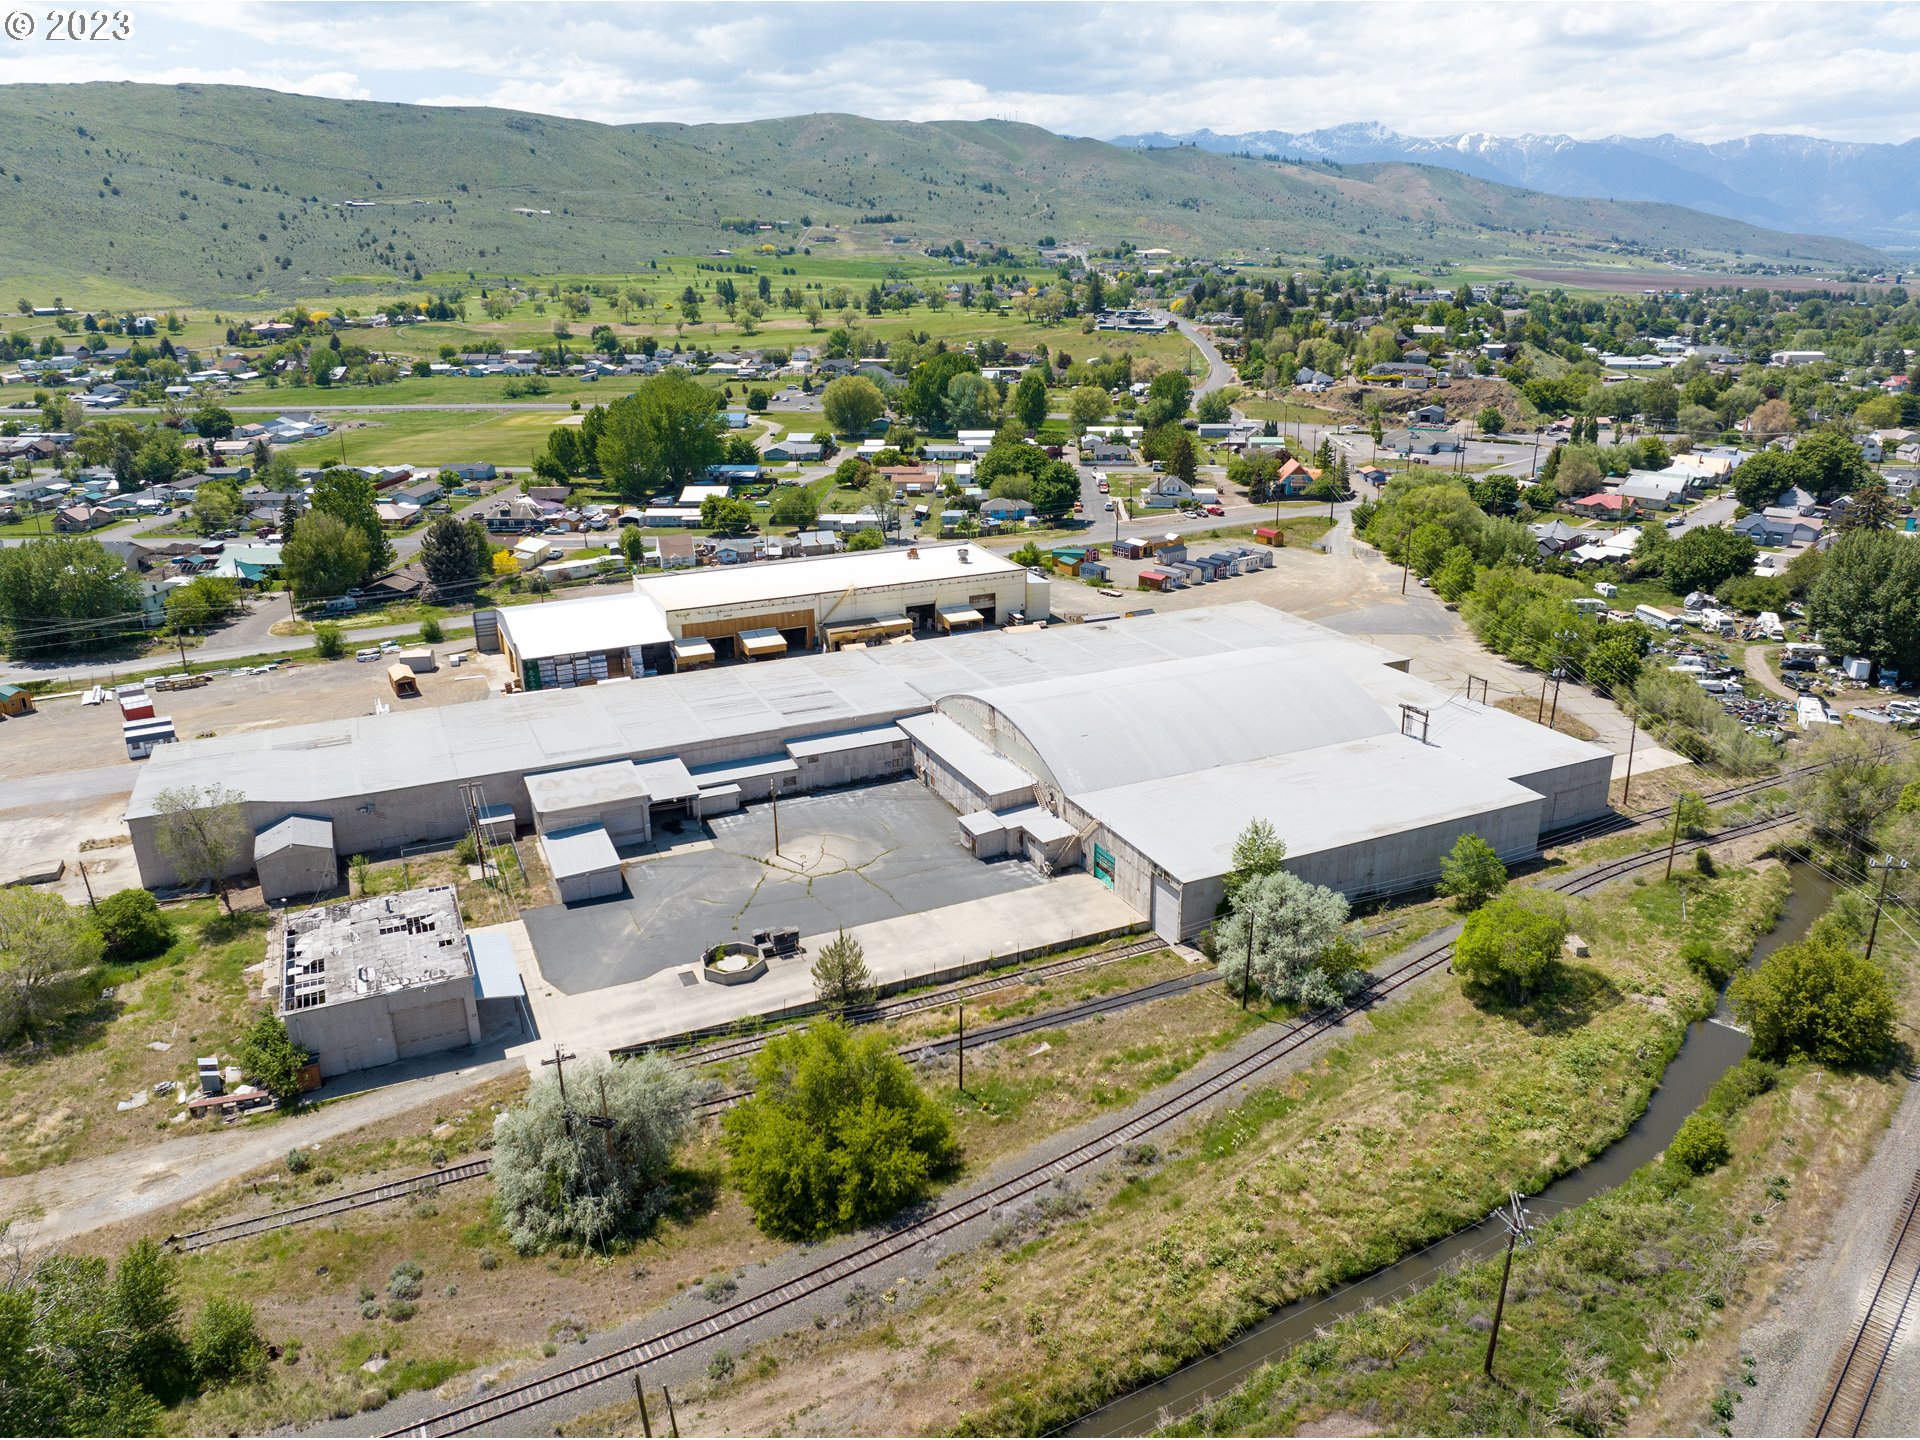 This is a unique opportunity to redevelop a former plywood mill facility in Baker City, Oregon.  With over twelve acres and more than one hundred thousand square feet of warehouse space, the possibilities are limitless.  Additional outbuildings offer even more opportunities.  The property is well situated on the main Union Pacific line through the region.  Showings by appointment only.